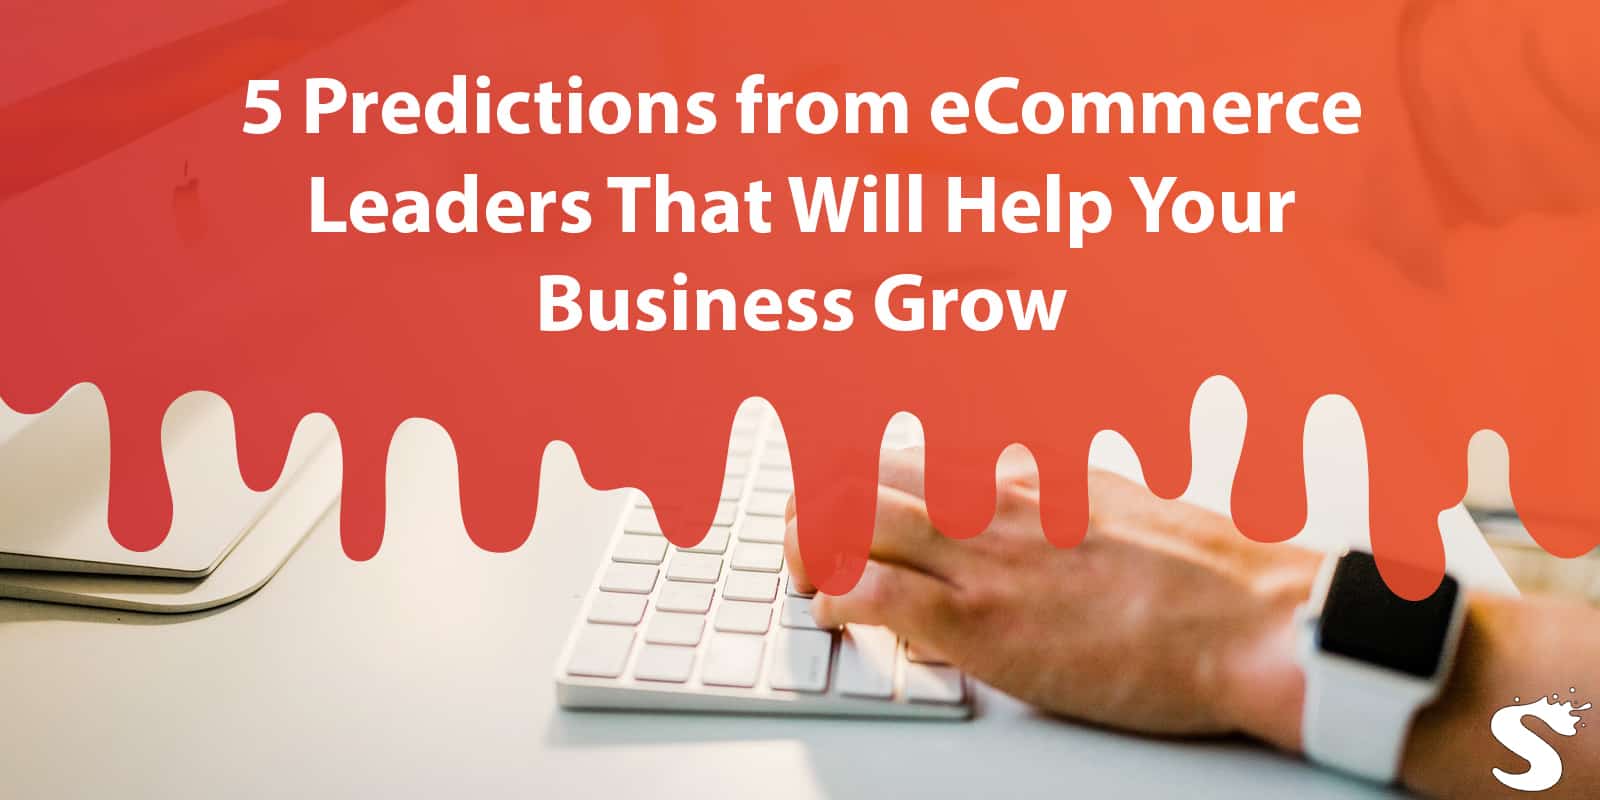 5 Predictions from eCommerce Leaders That Will Help Your Business Grow